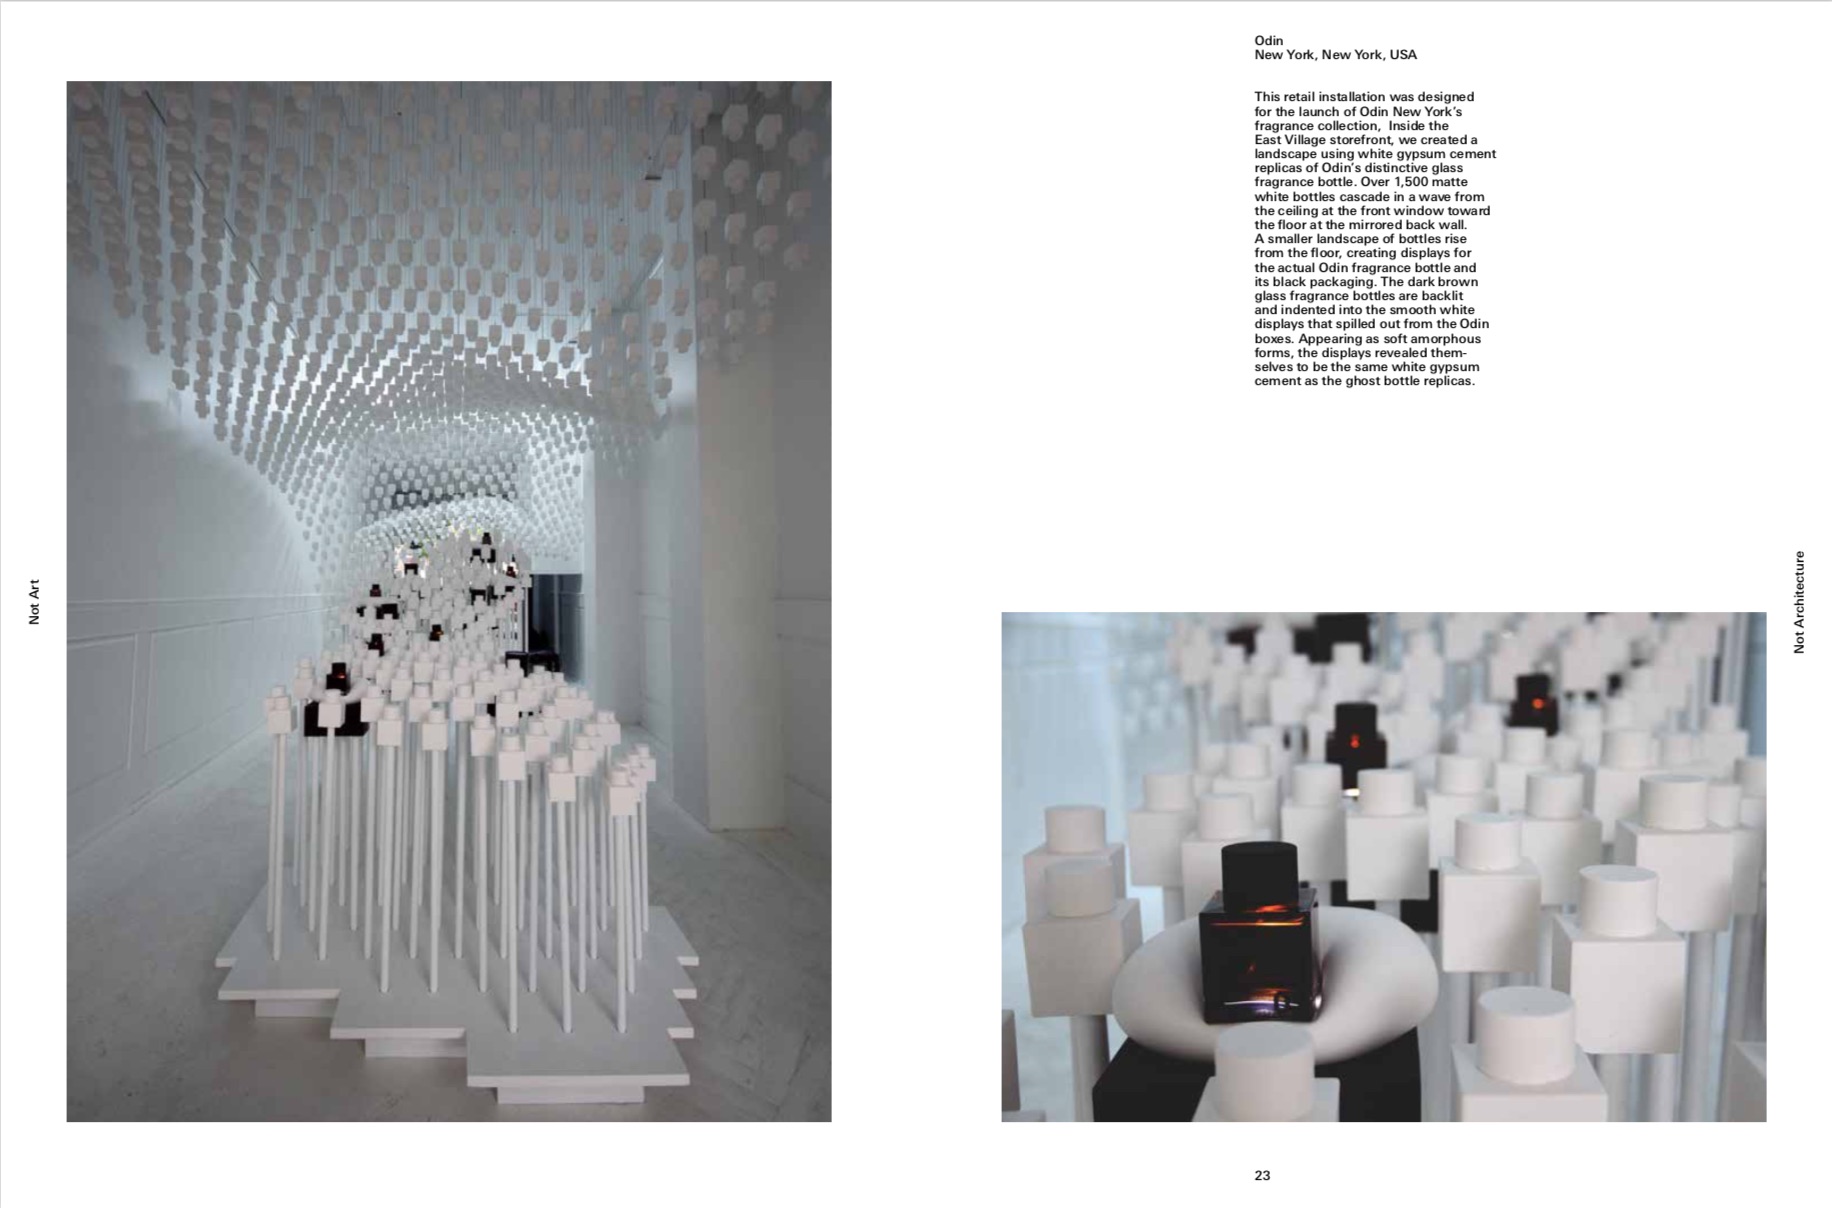 By Snarkitecture from Snarkitecture copyright Phaidon 2018